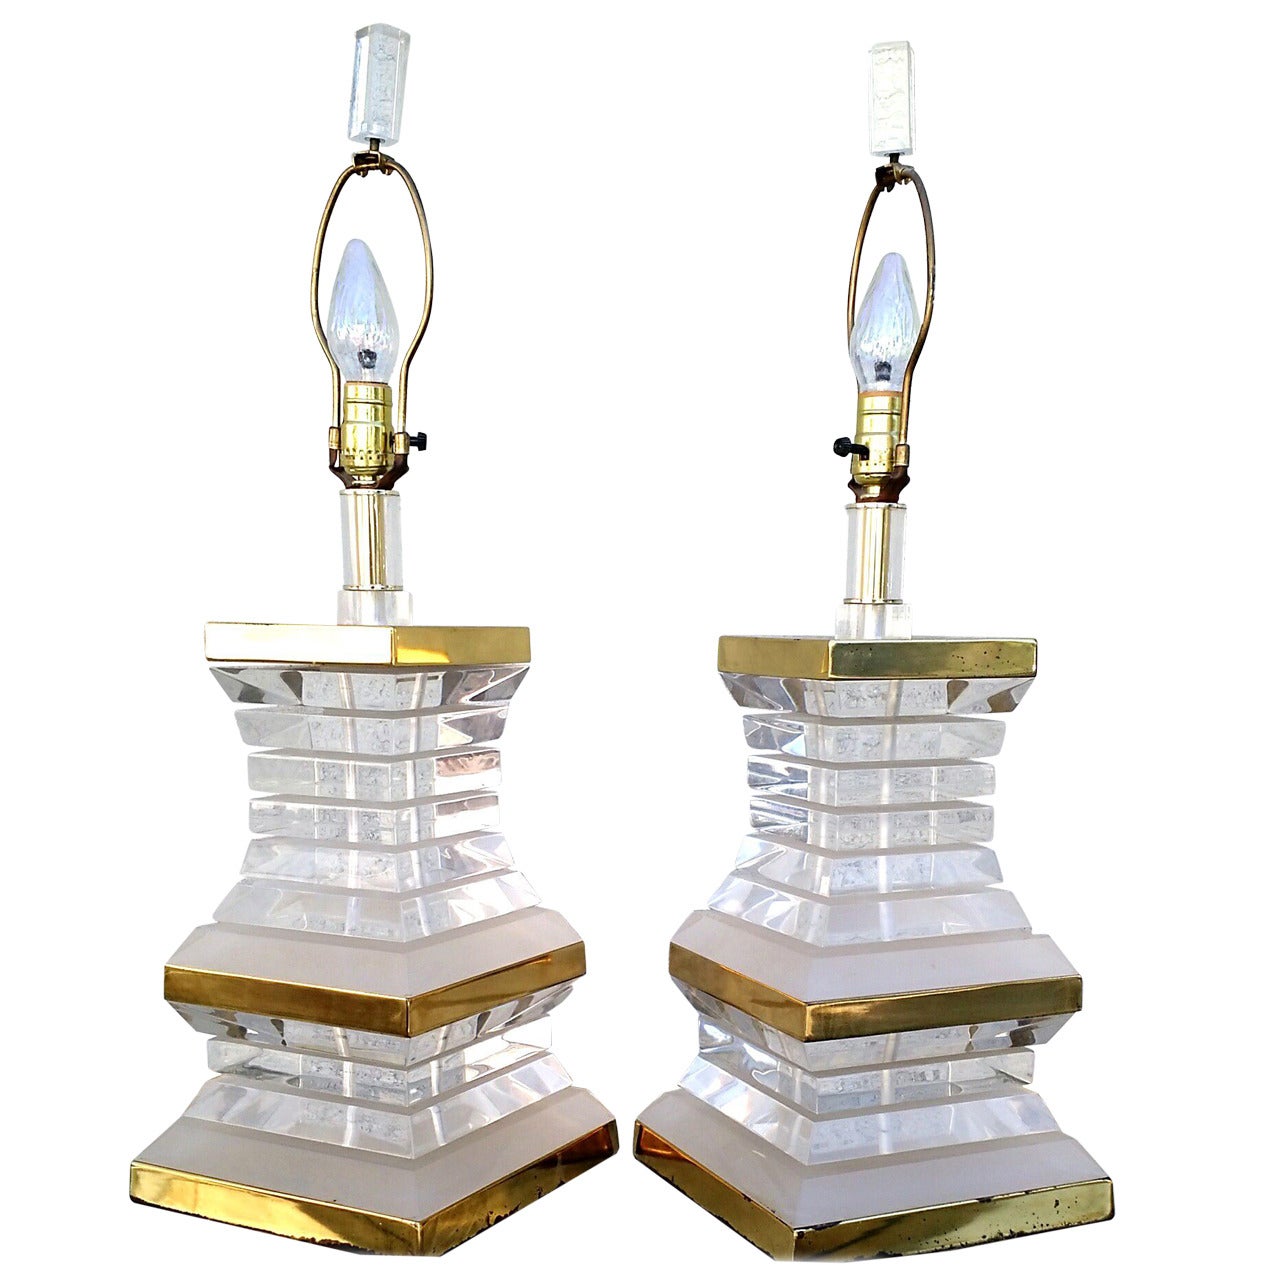 Pair of Stacked Lucite and Brass Lamps, circa 1970s Hollywood Regency